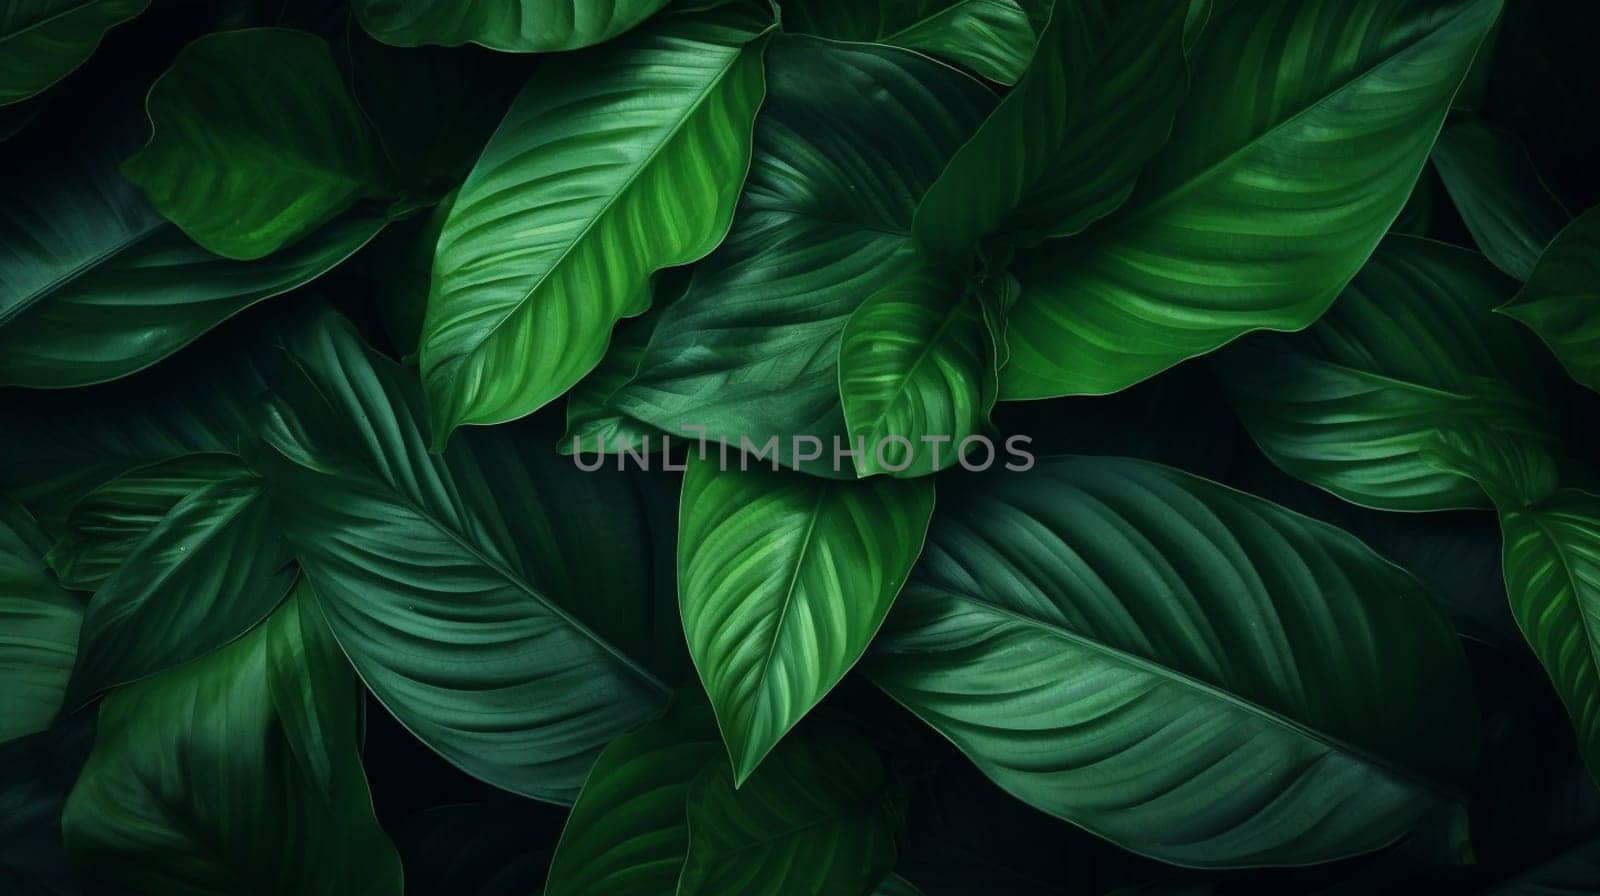 Lush green leaves with pronounced veins creating a natural pattern. High quality photo